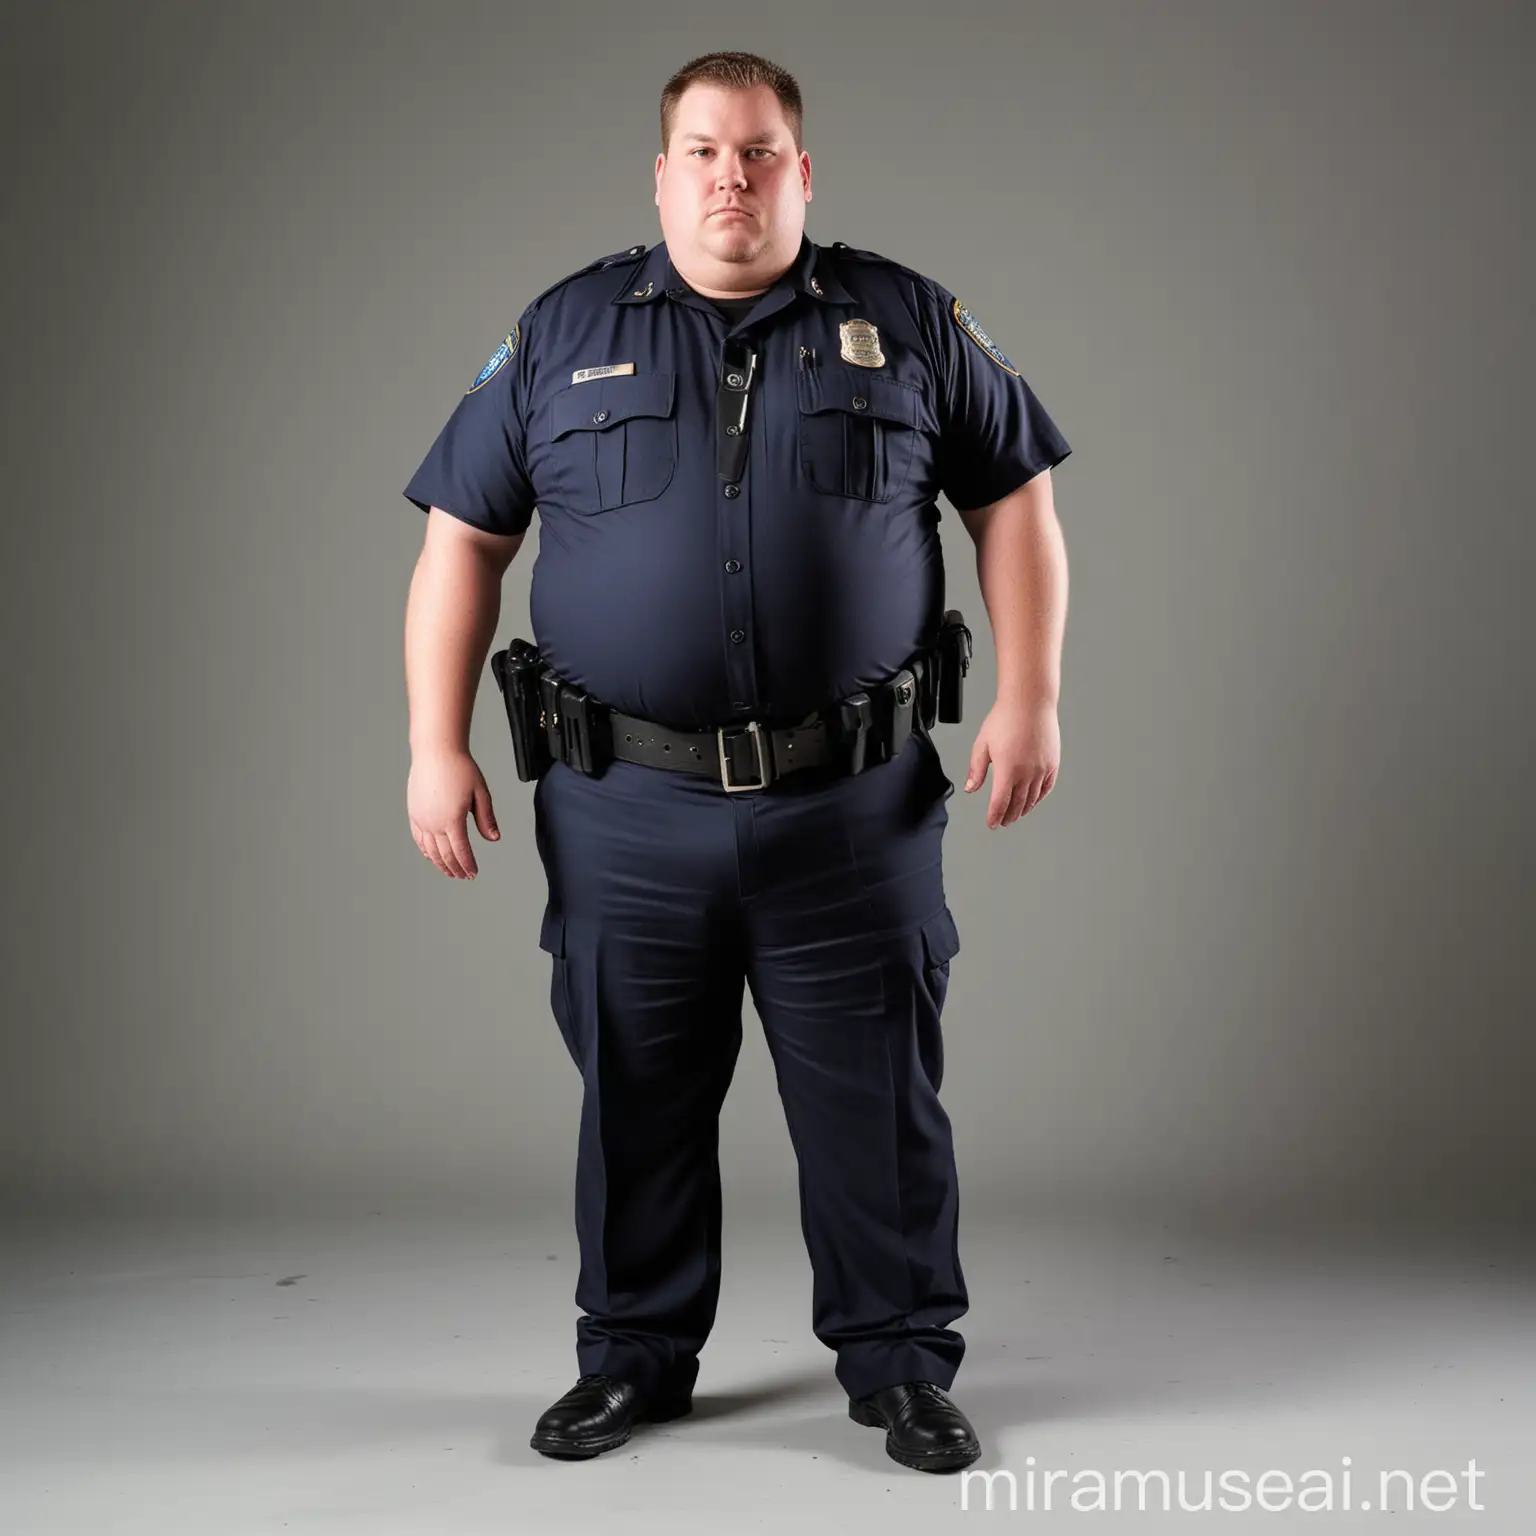 Overweight Male Police Officer in Full Uniform